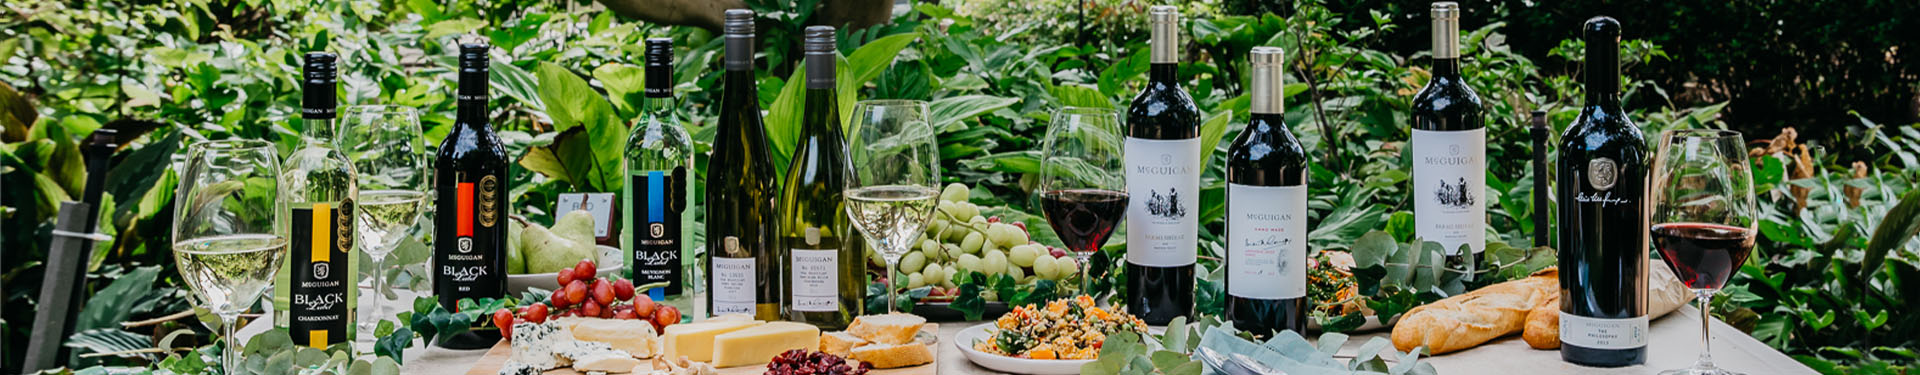 Various McGuigan wine varietals outdoors on a table with grapes, bread and cheese